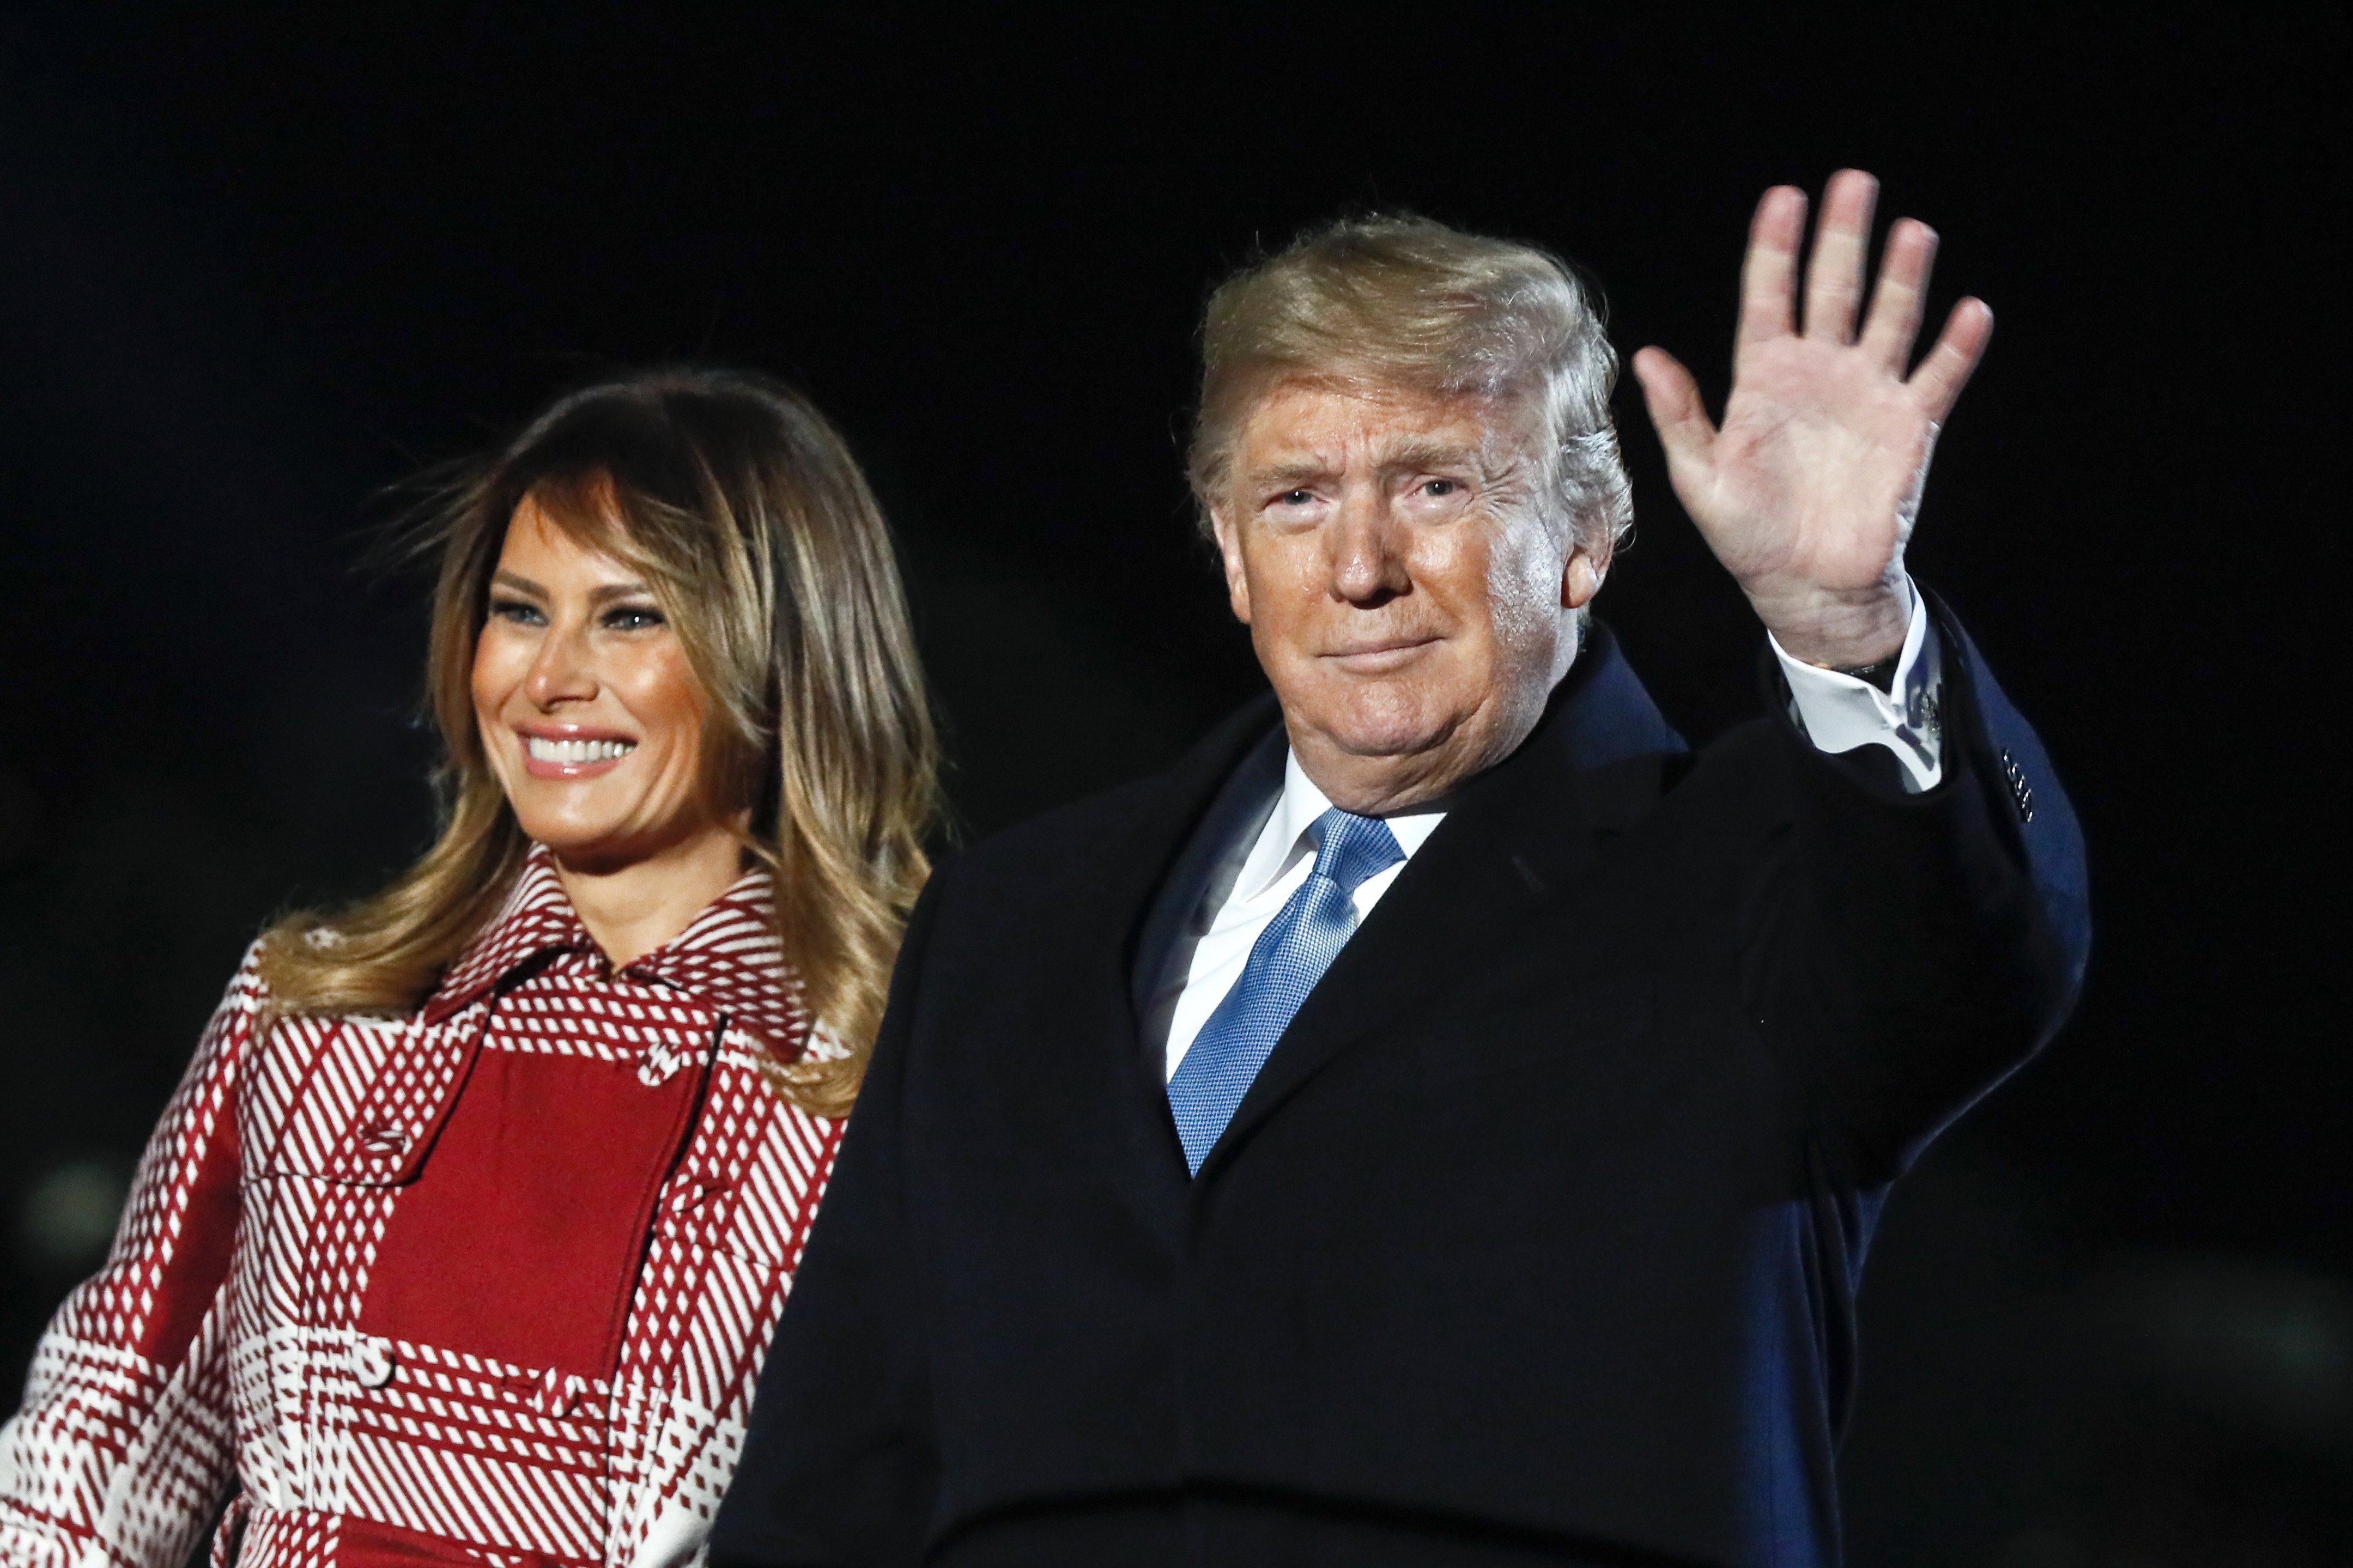  First lady Melania Trump and U.S. President Donald Trump attend the 97th Annual National Christmas Tree Lighting Ceremony in President's Park on December 05, 2019|Photo:Getty Images